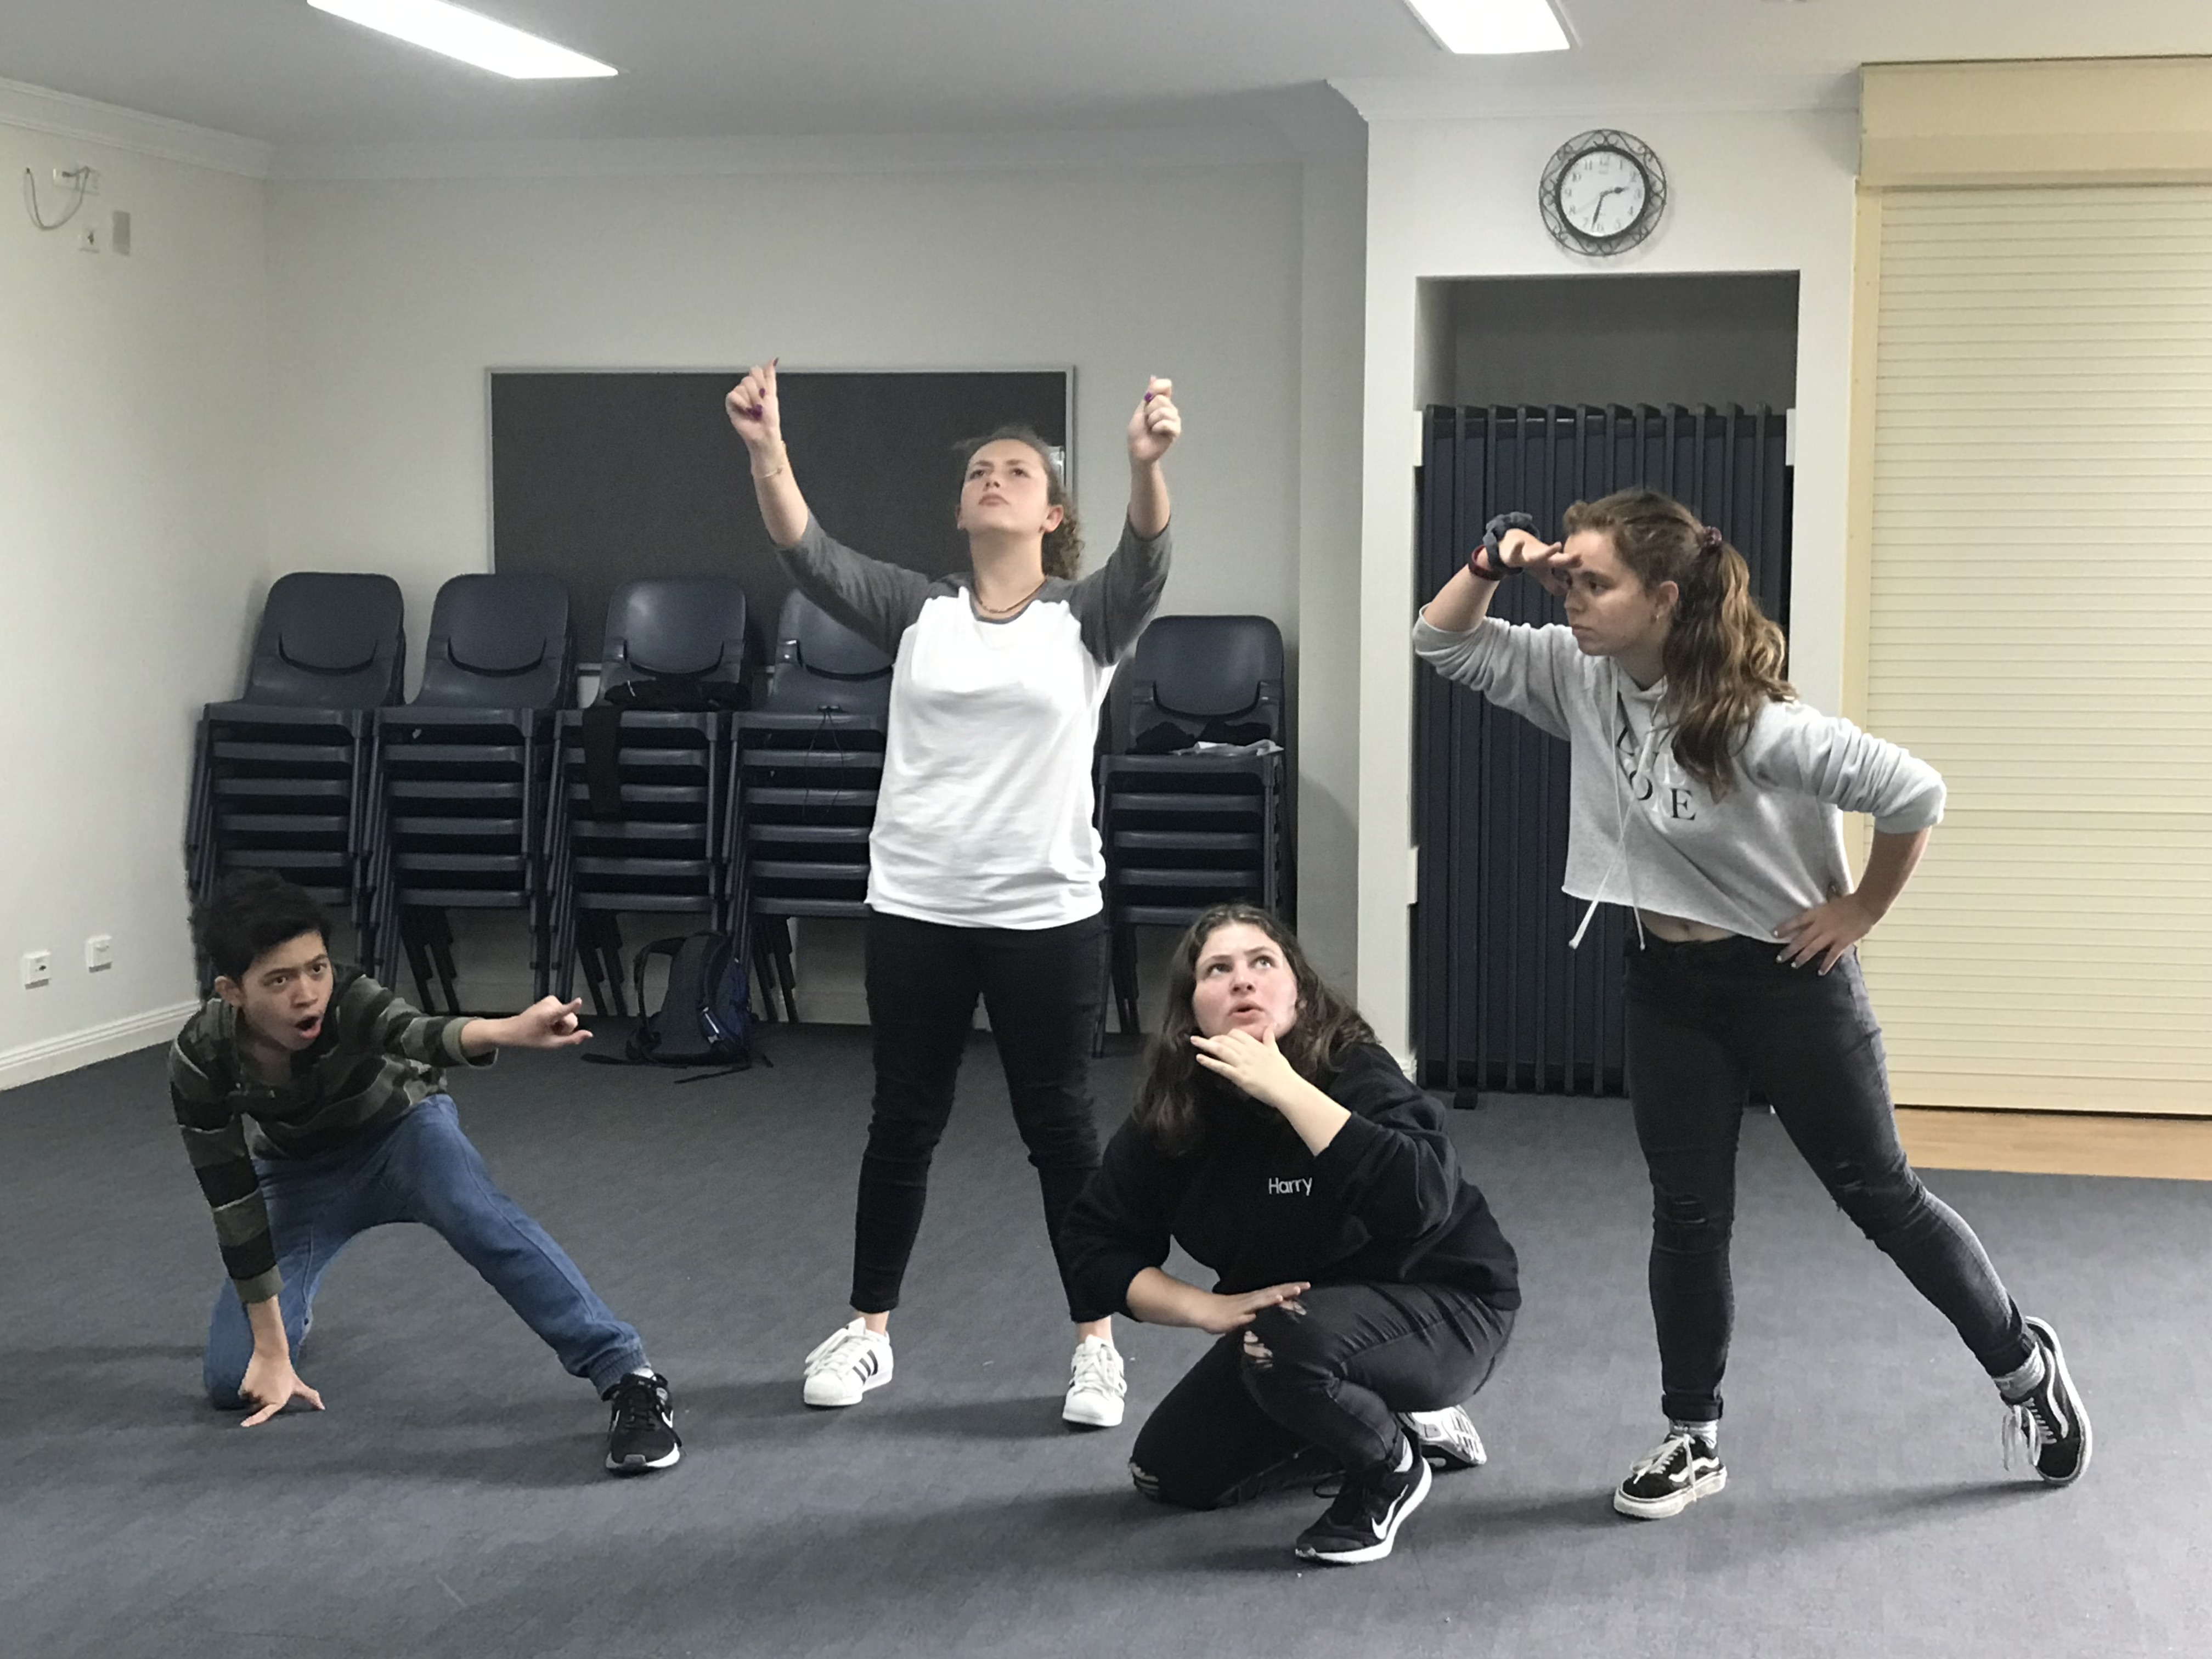 4 students acting out a scene in a performance space